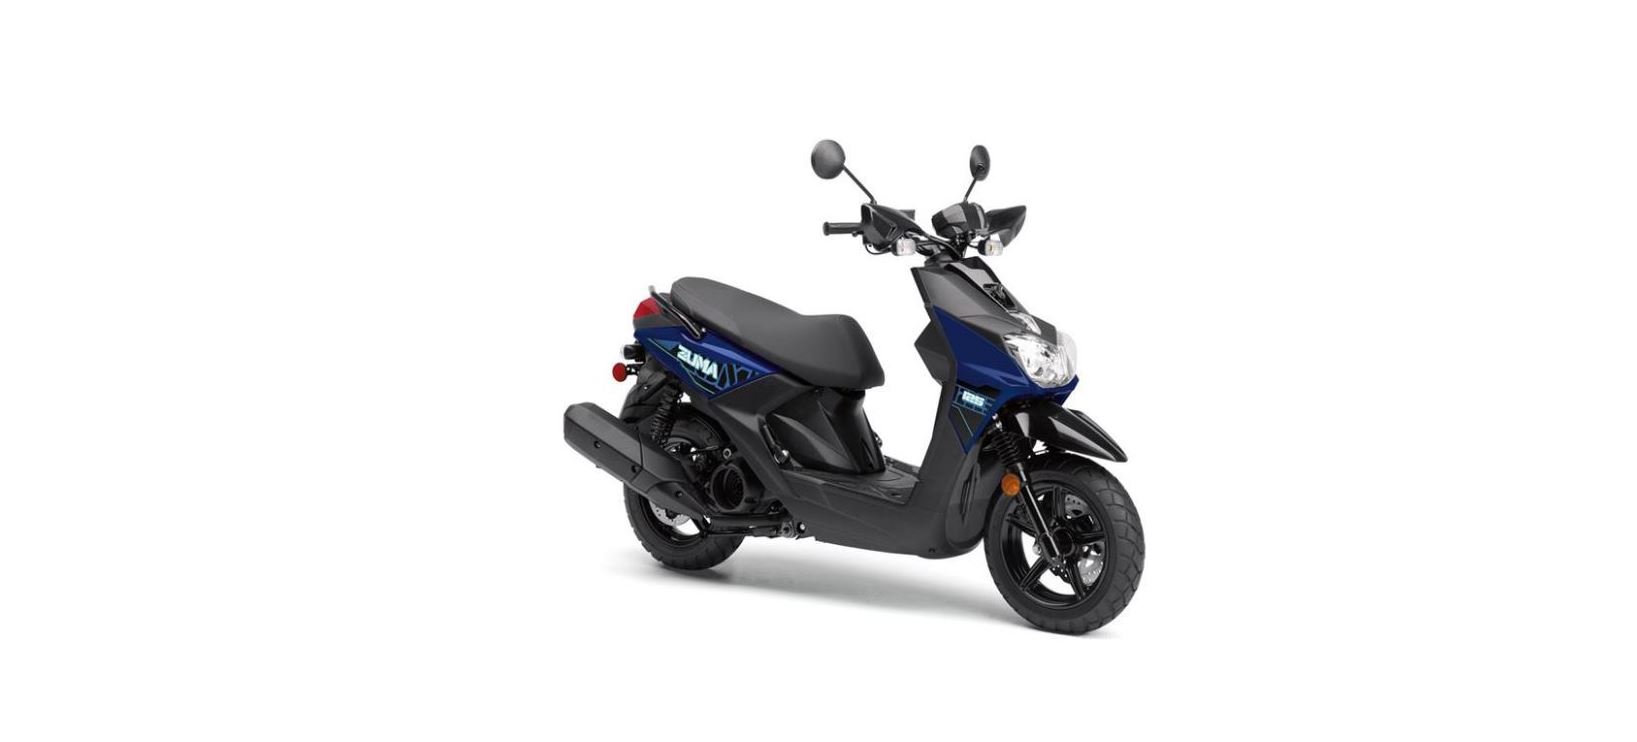 2021 Yahama Motorcycles & Scooters